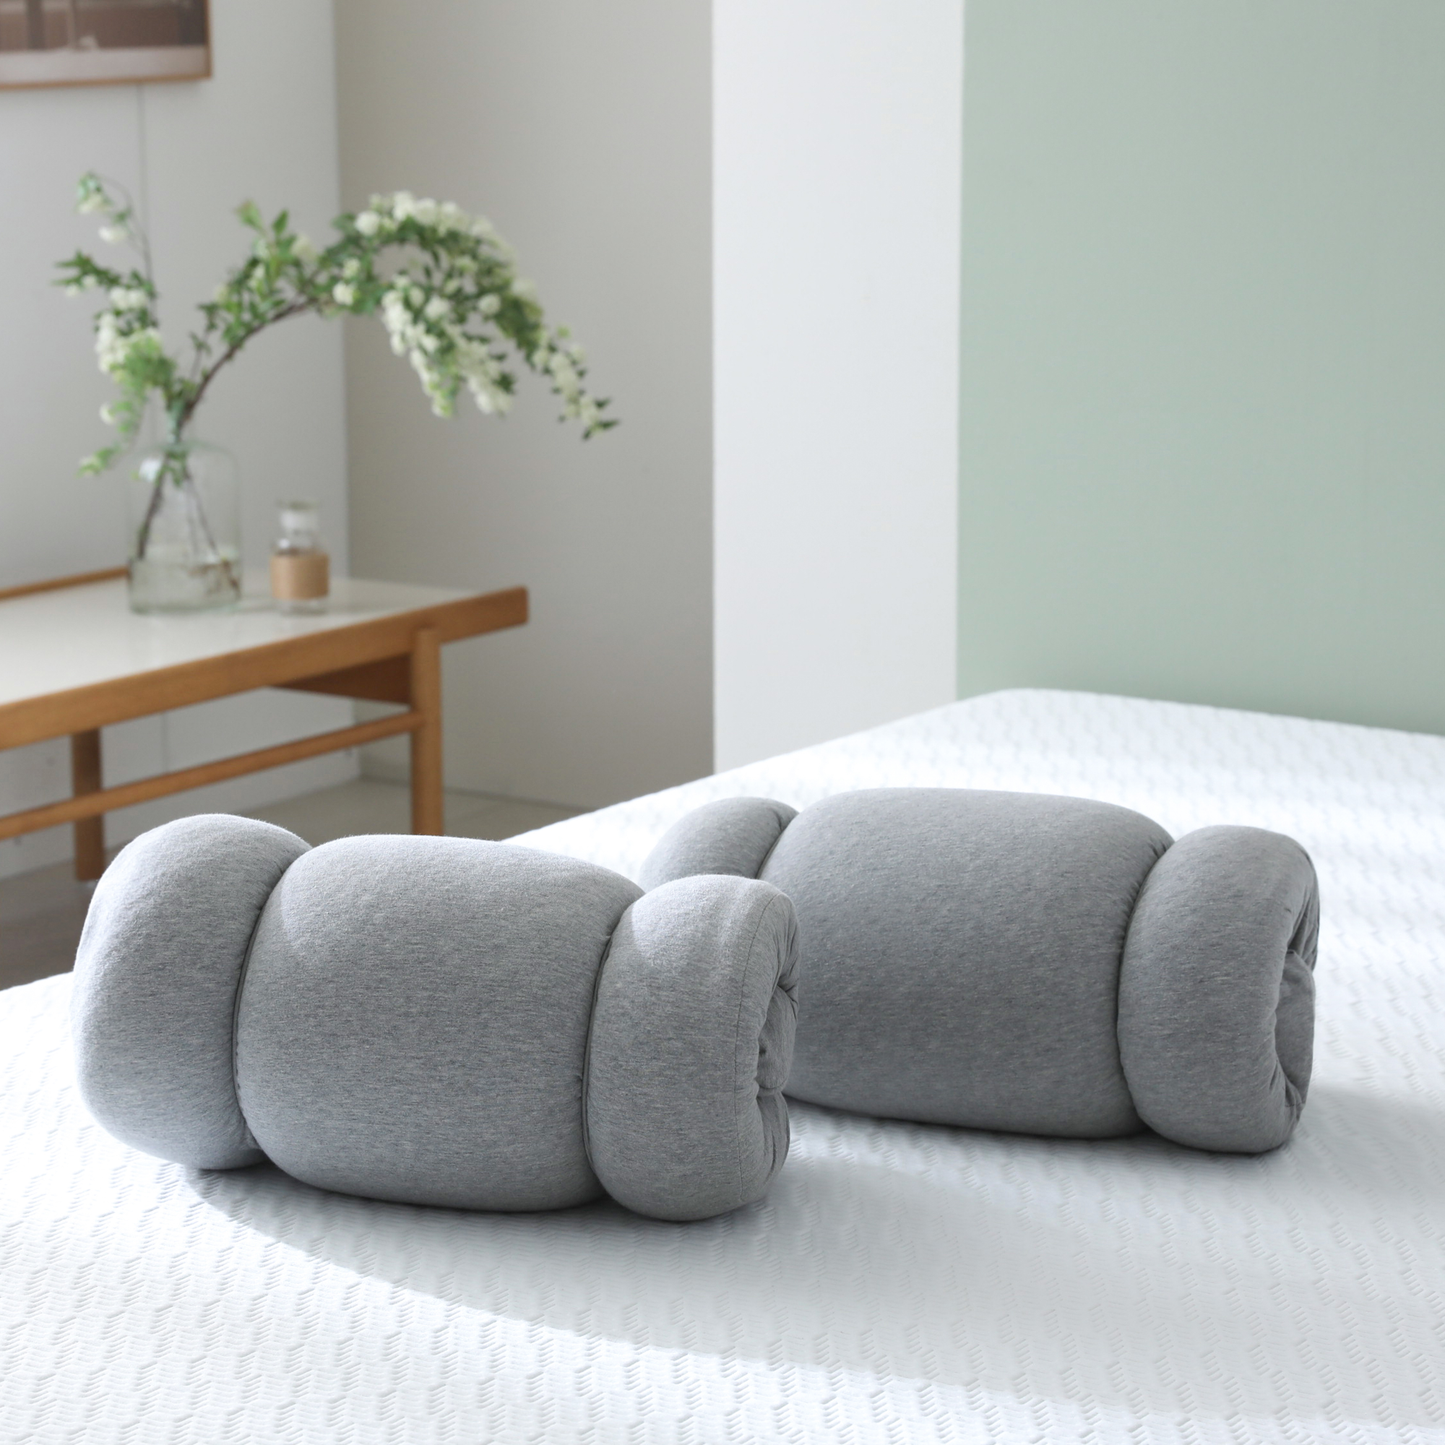 'Cool Series' Green Tea Memory Foam Traditional Pillow (Without Air Holes) - Medium Firm